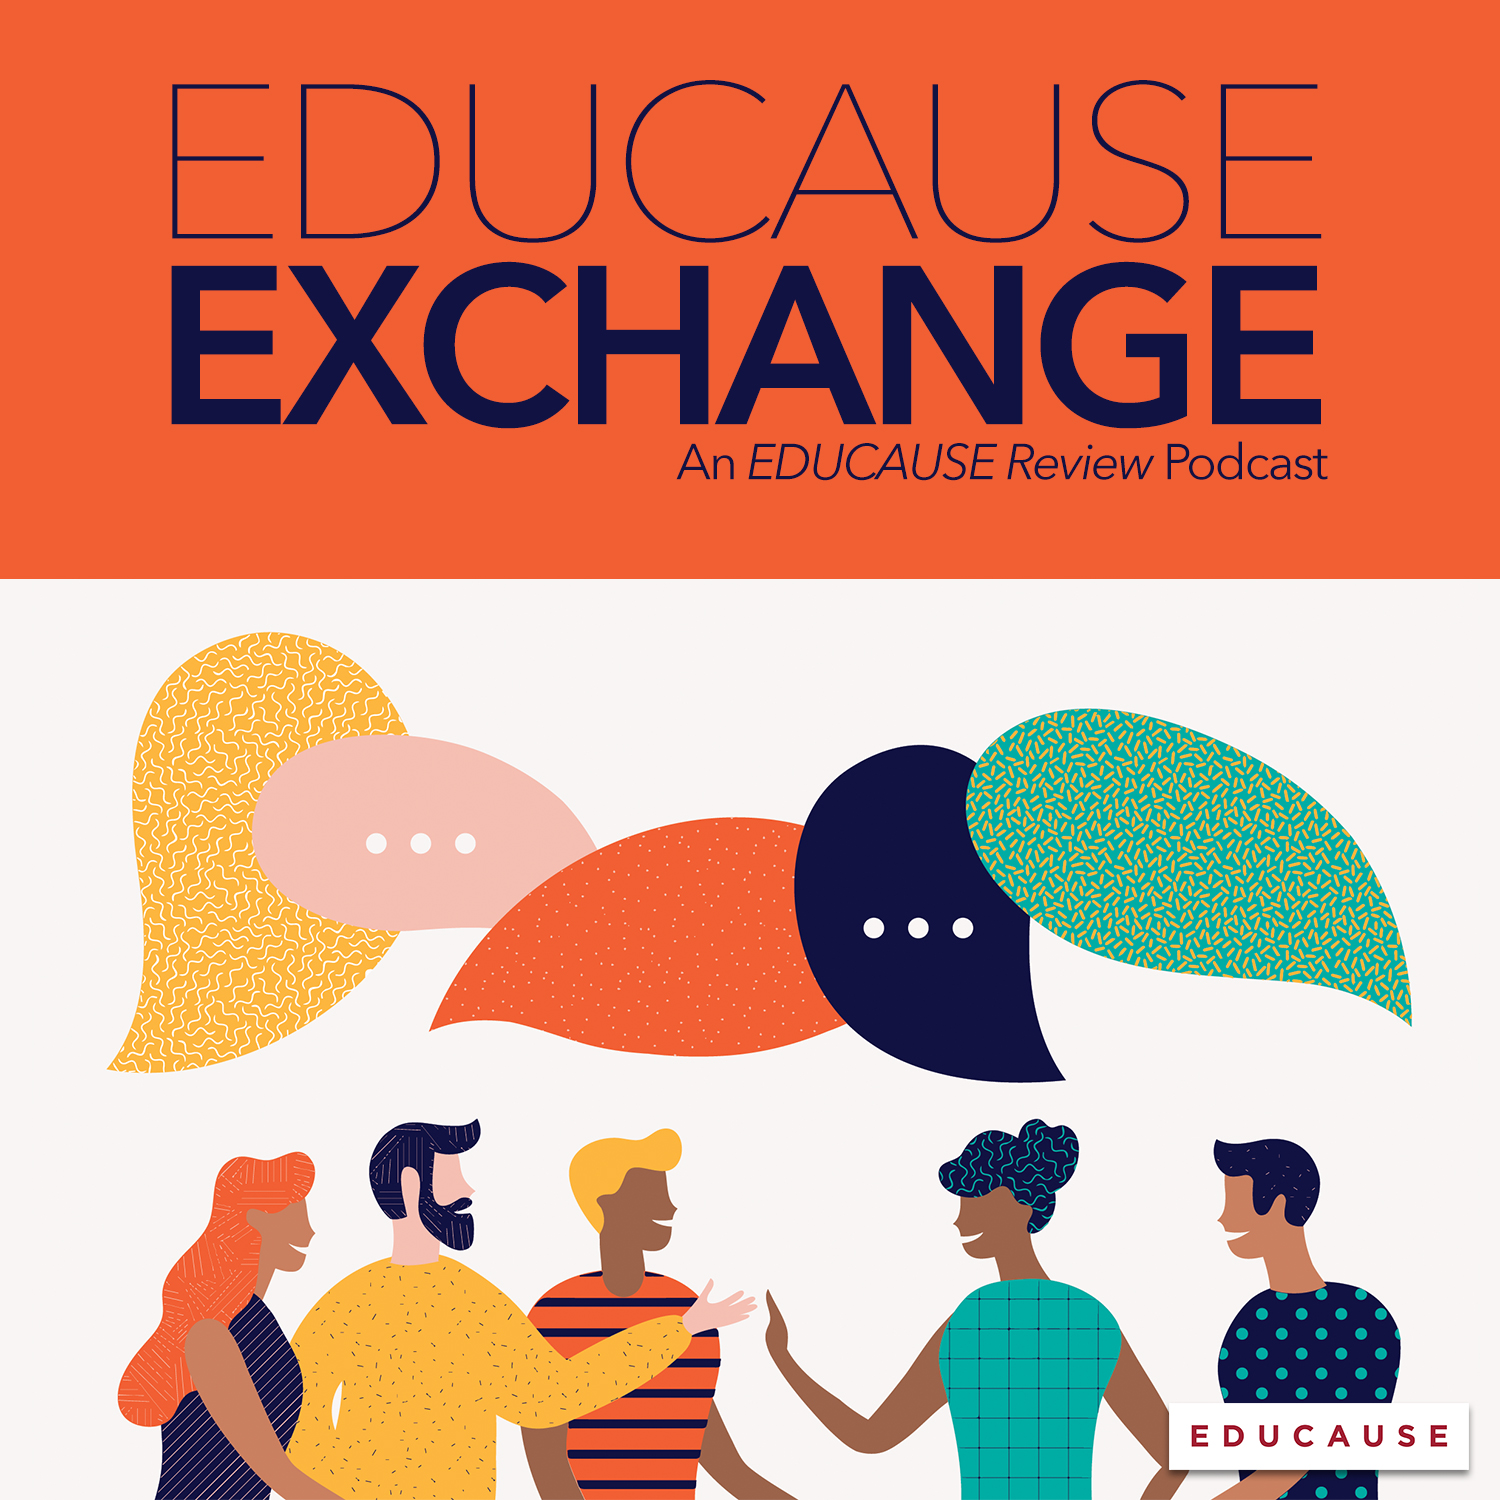 EDUCAUSE Exchange | An EDUCAUSE Review Podcast | Artwork with illustrations of people in conversation